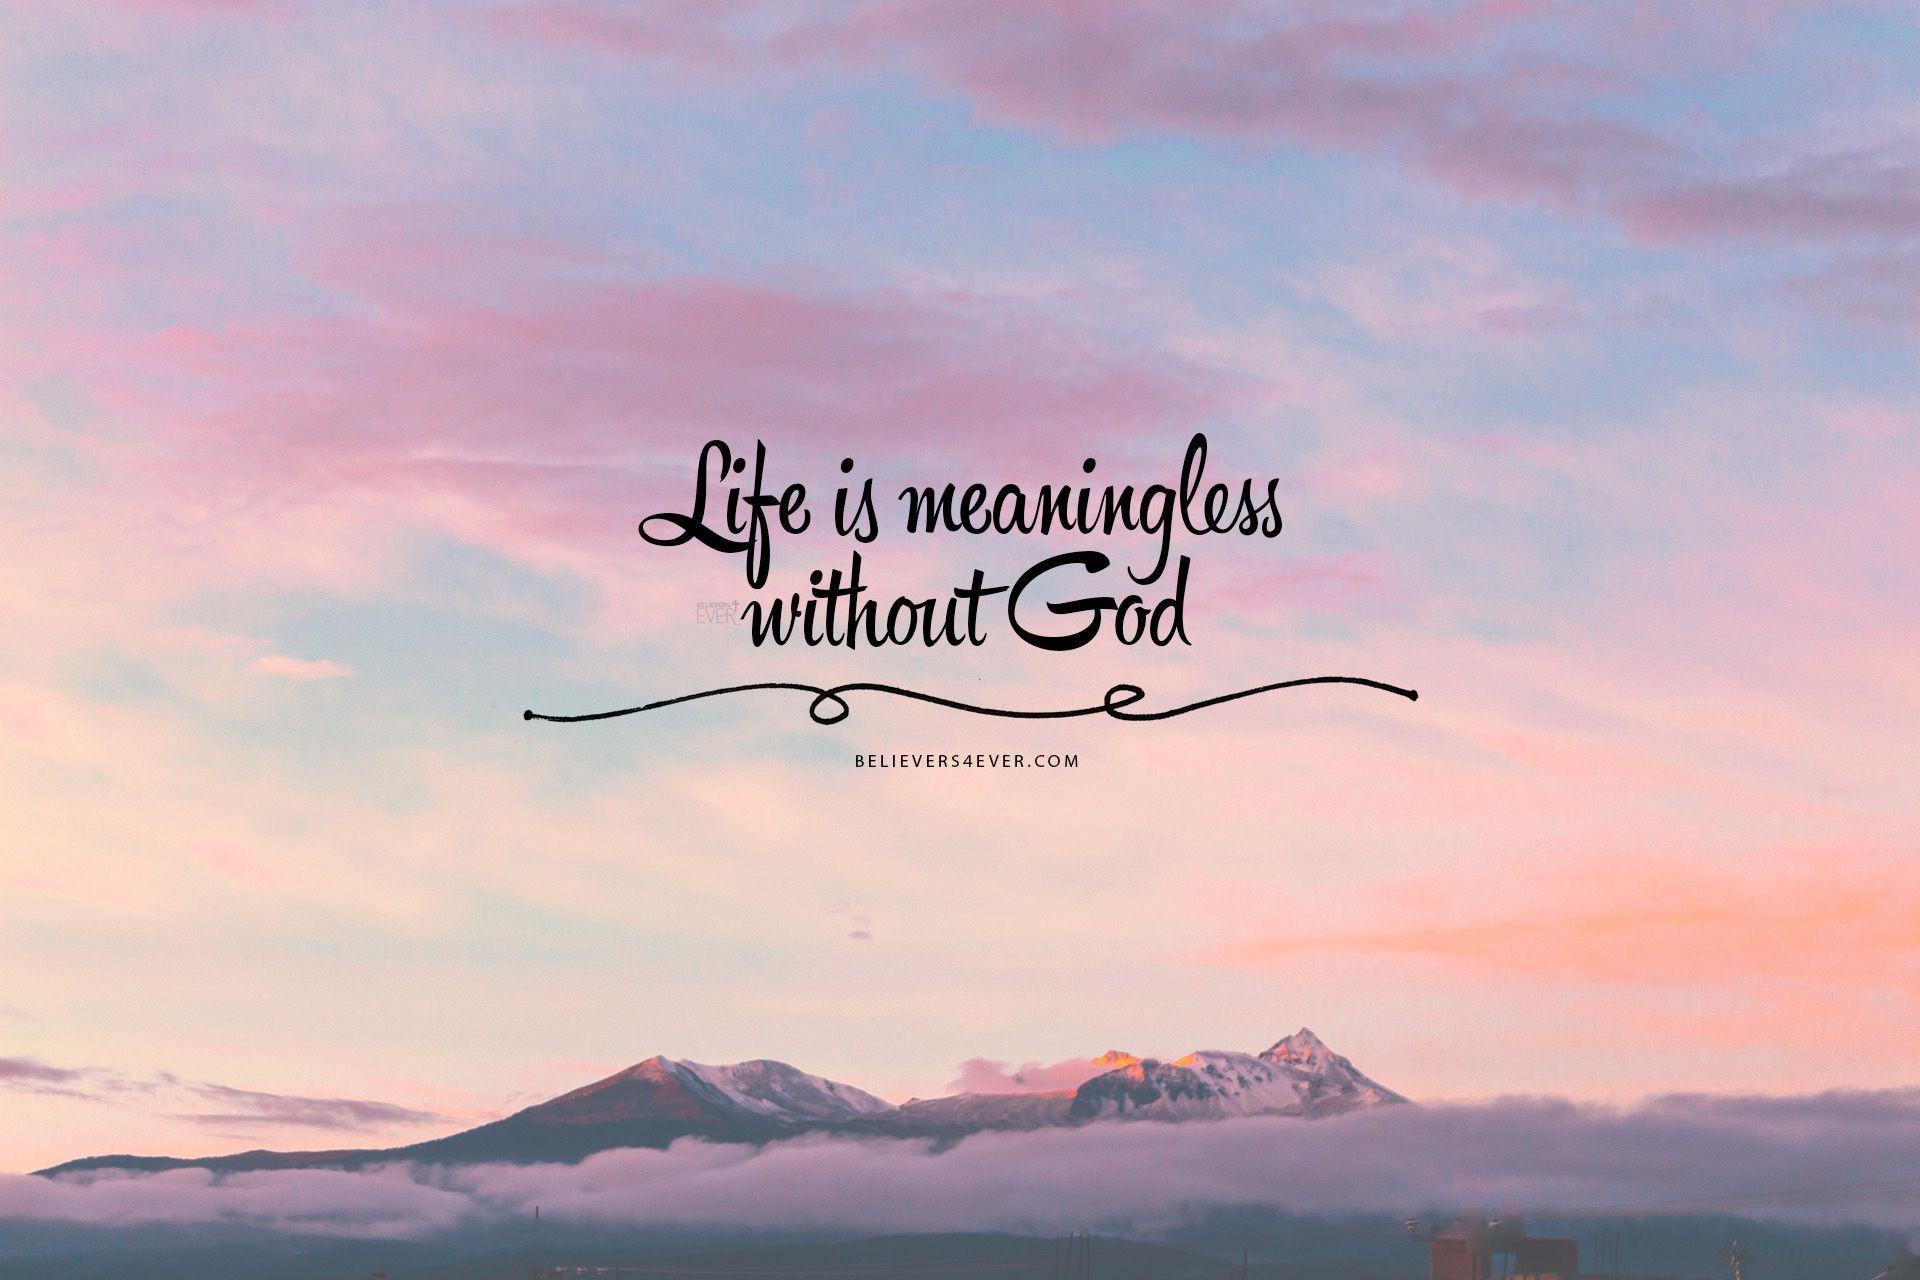 Life is meaningless without God.com. Bible verse desktop wallpaper, Laptop wallpaper desktop wallpaper, Laptop wallpaper quotes